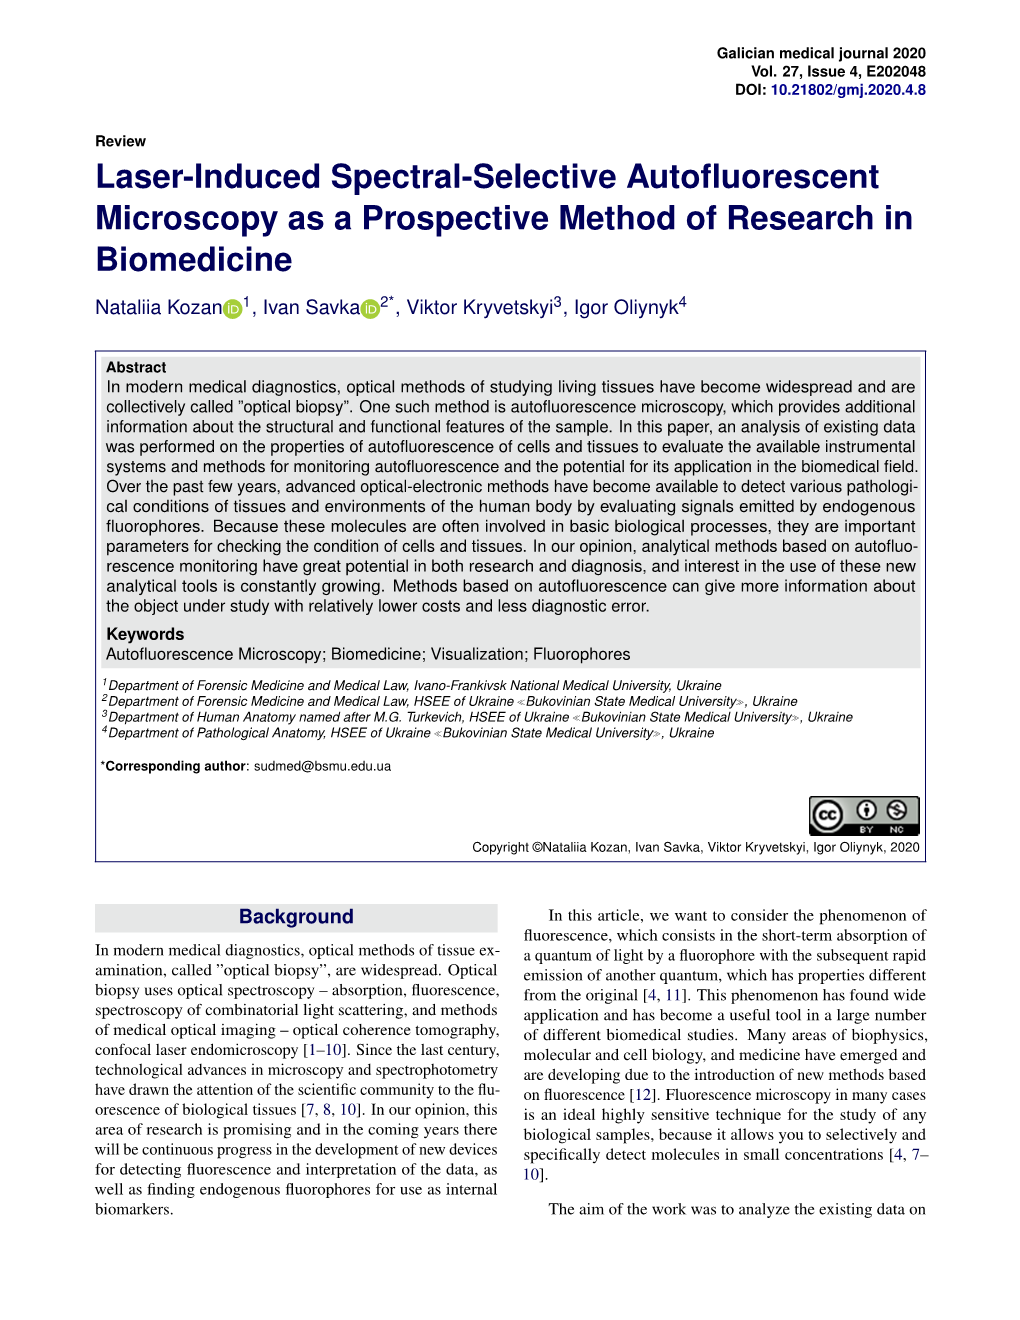 Laser-Induced Spectral-Selective Autofluorescent Microscopy As a Prospective Method of Research in Biomedicine